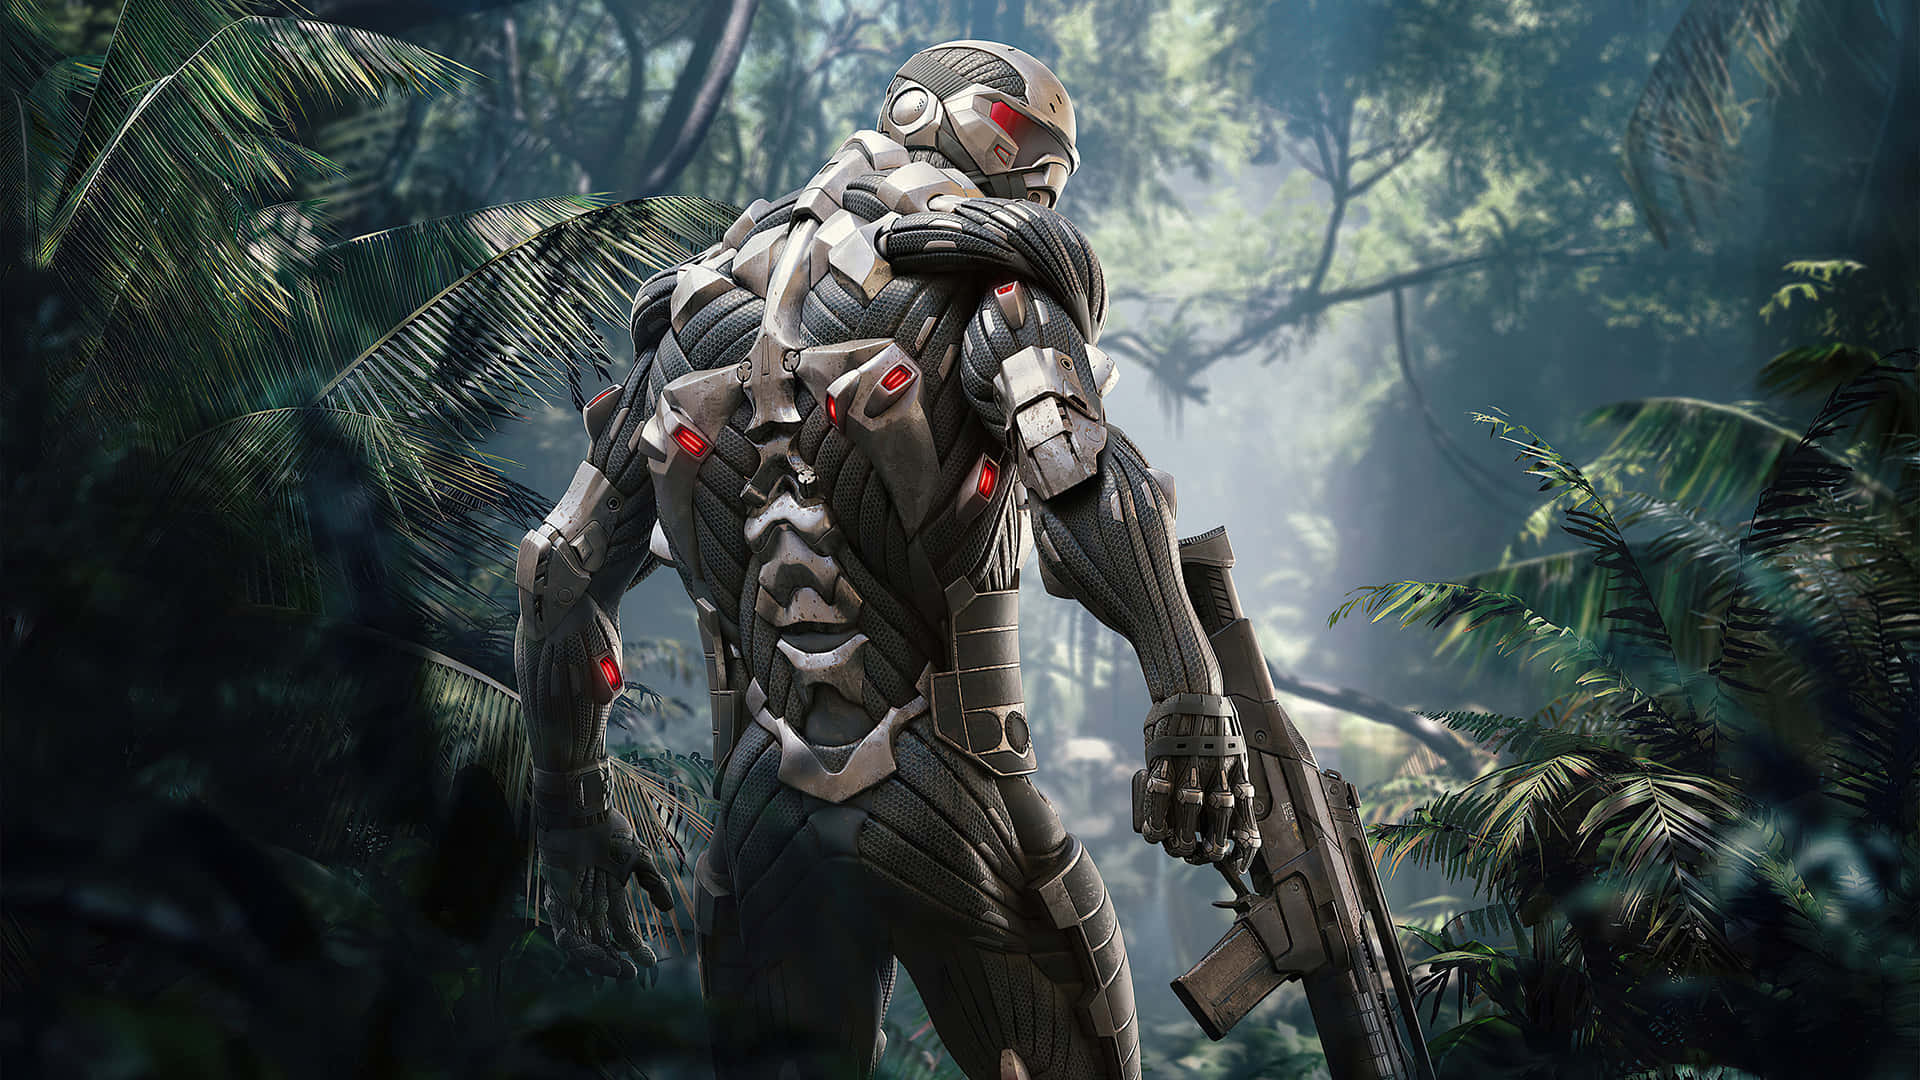 Take on the role of Prophet in Crysis 3 and lead the Resistance to Victory